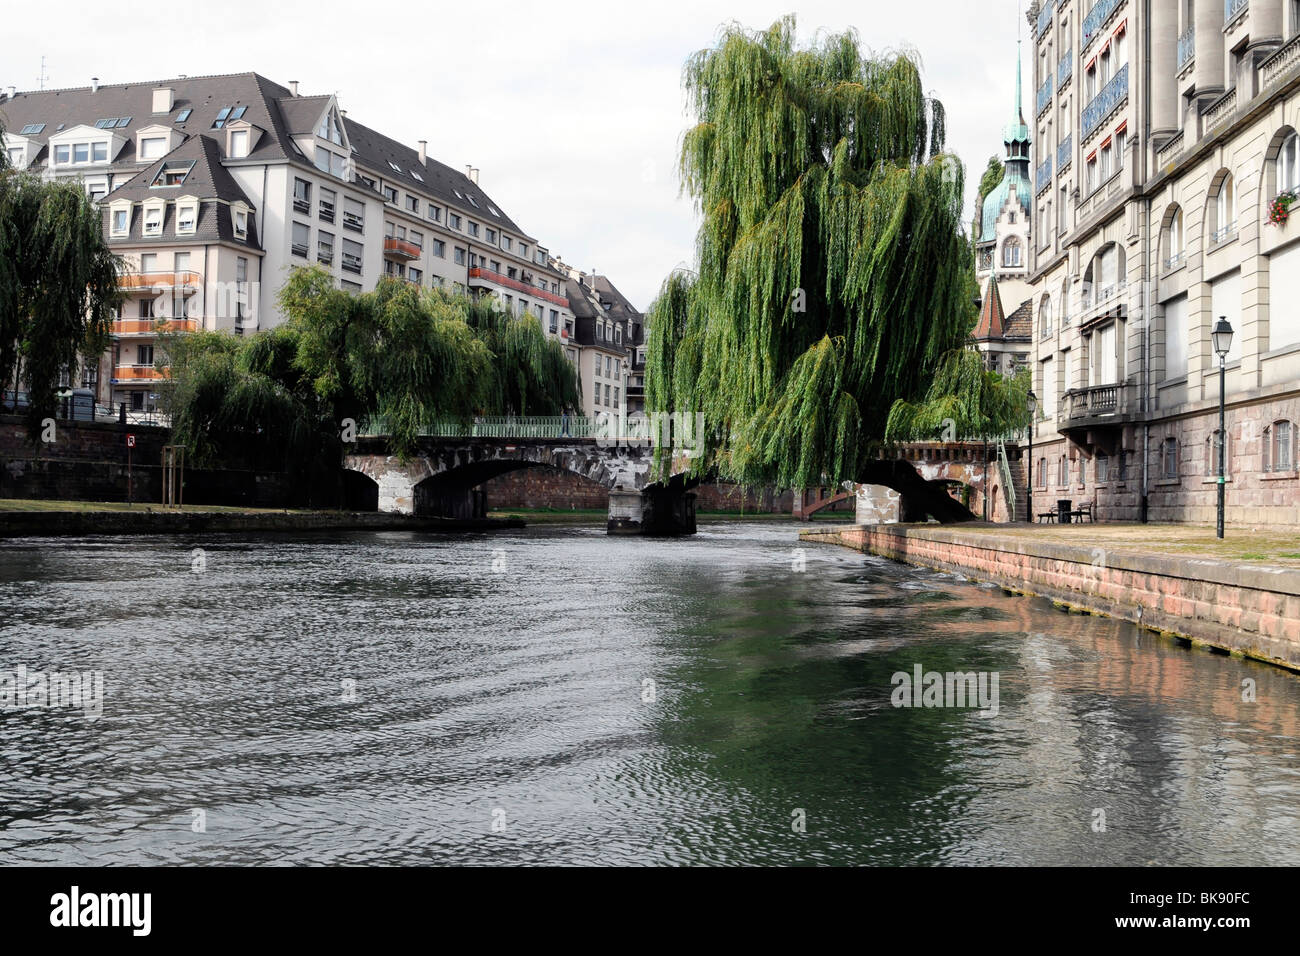 Boat ride on the Ill River, Strasbourg, Alsace, France, Europe Stock Photo